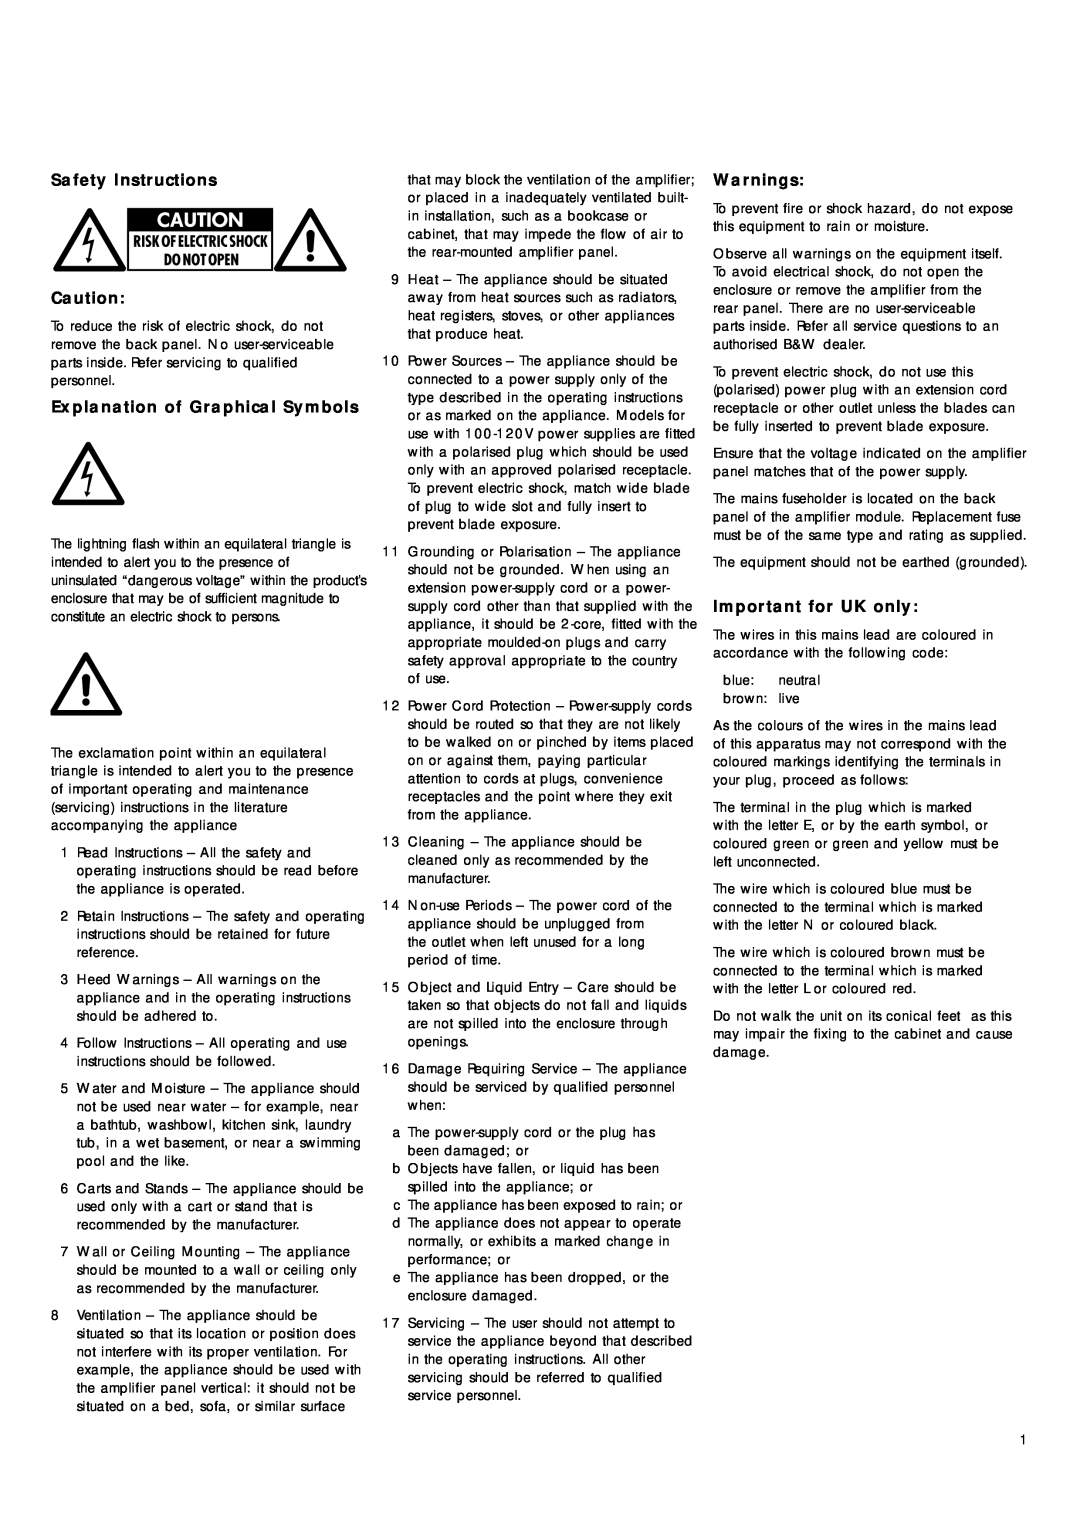 Bowers & Wilkins ASW500 owner manual Safety Instructions, Explanation of Graphical Symbols, Warnings, Important for UK only 